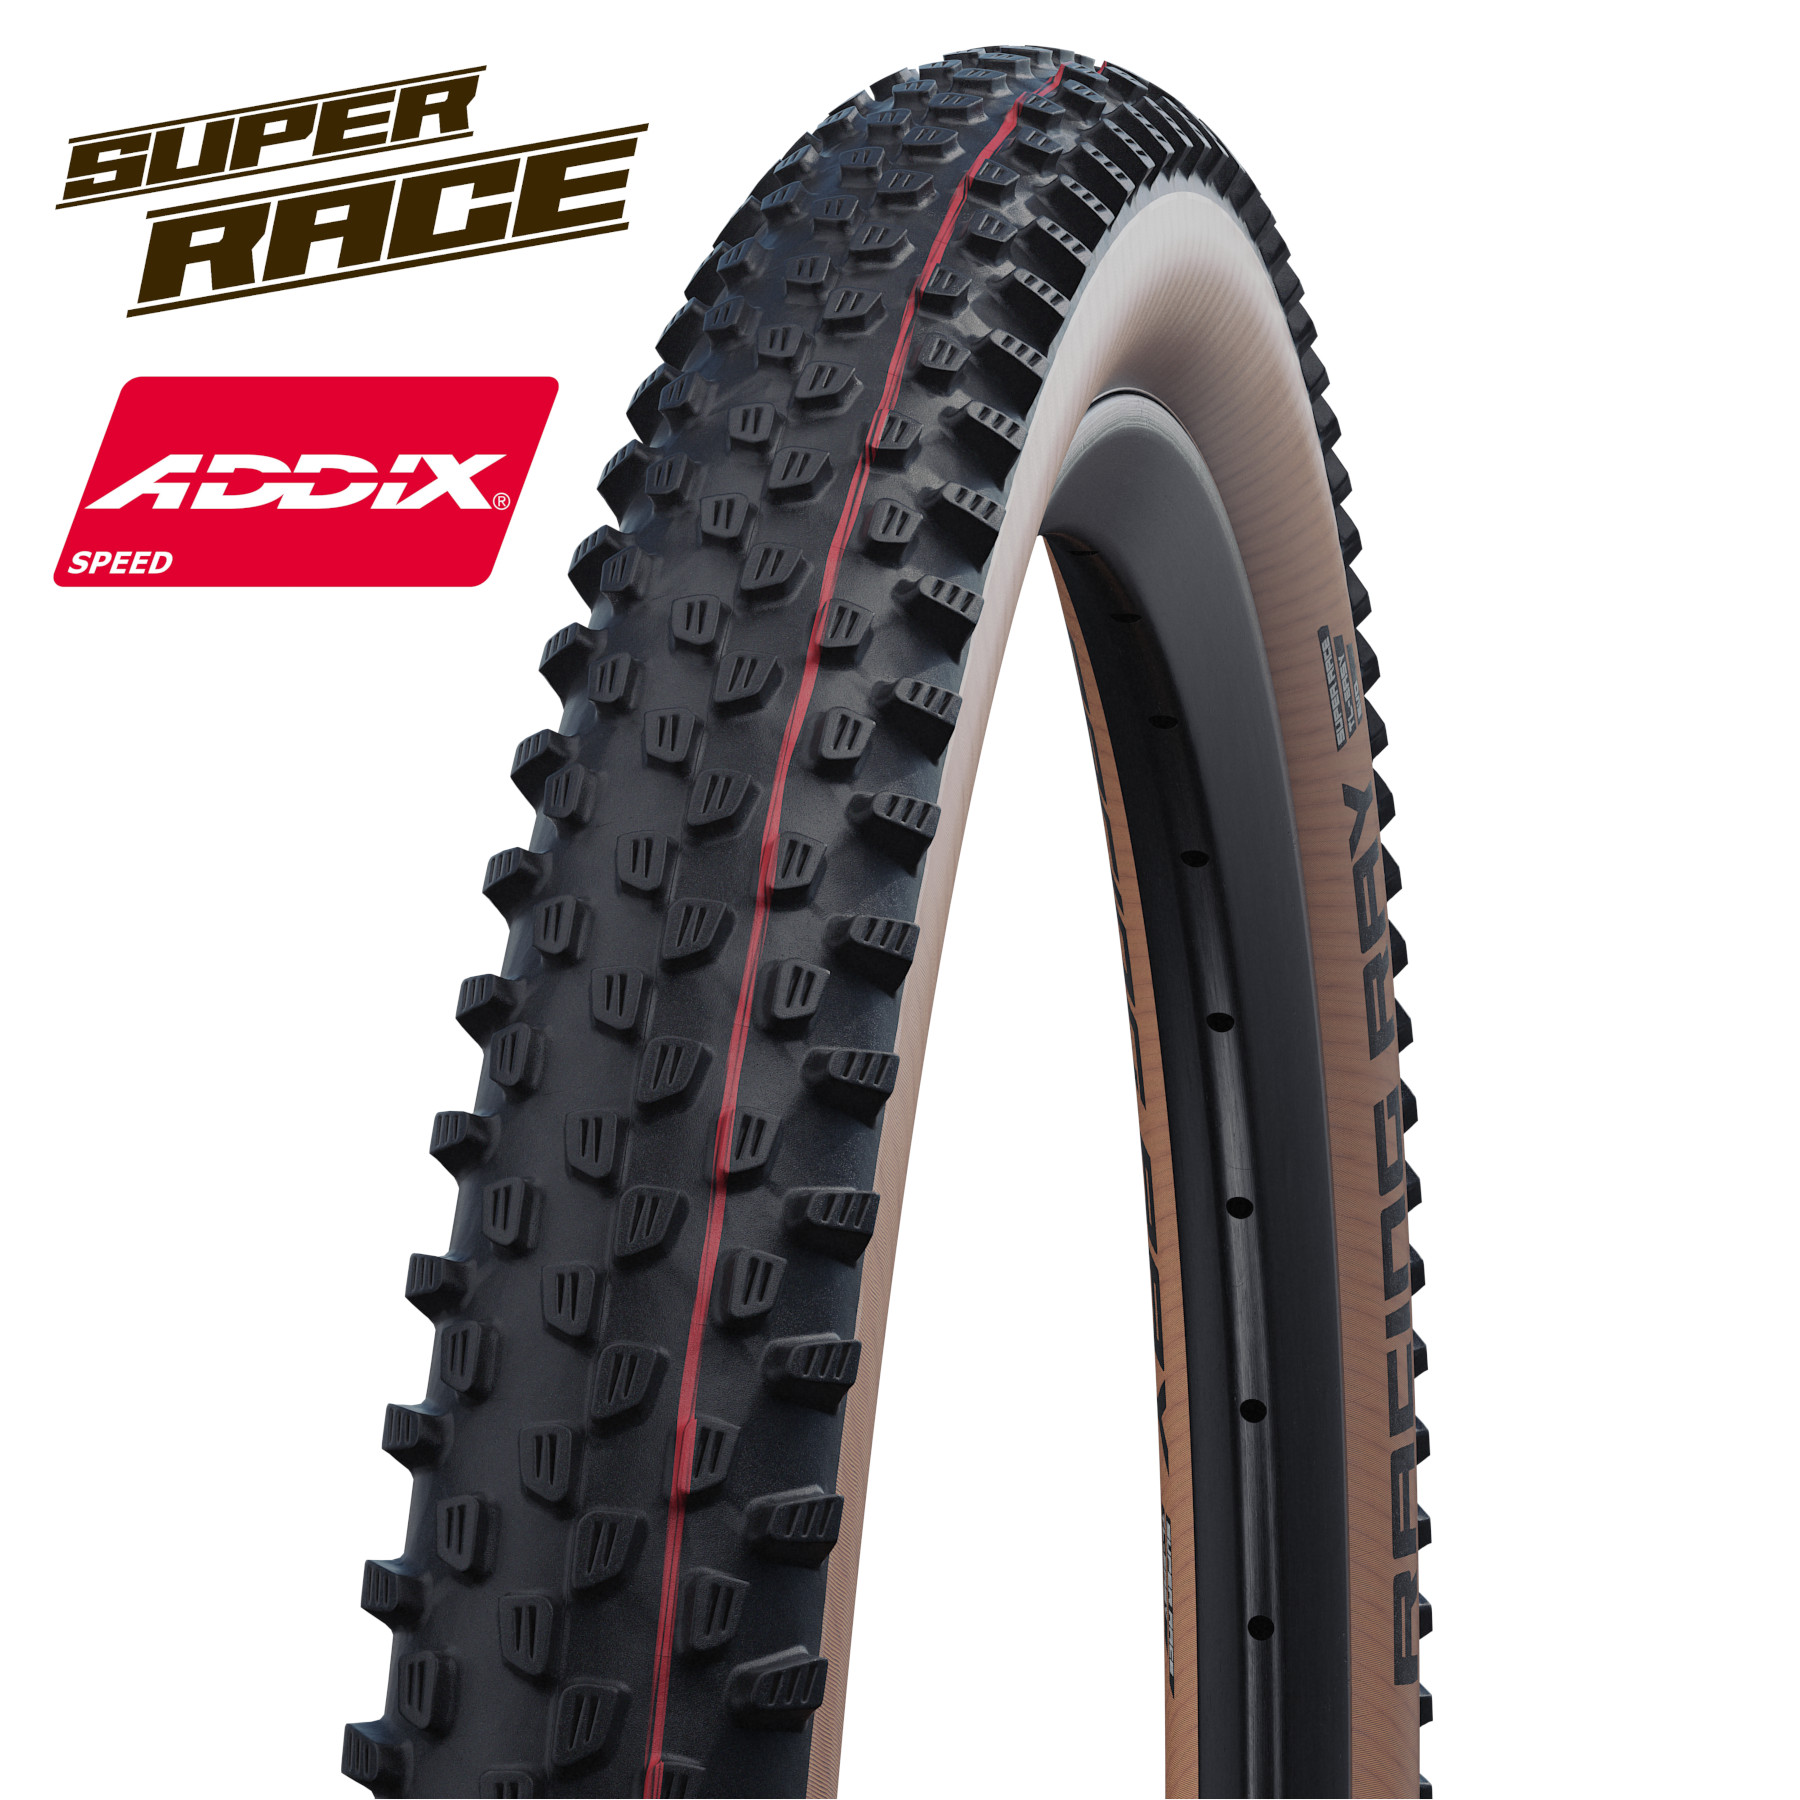 Picture of Schwalbe Racing Ray Evolution MTB Folding Tire - AddixSpeed - SuperRace - TLEasy - 29x2.25 Inches - Transparent-Skin